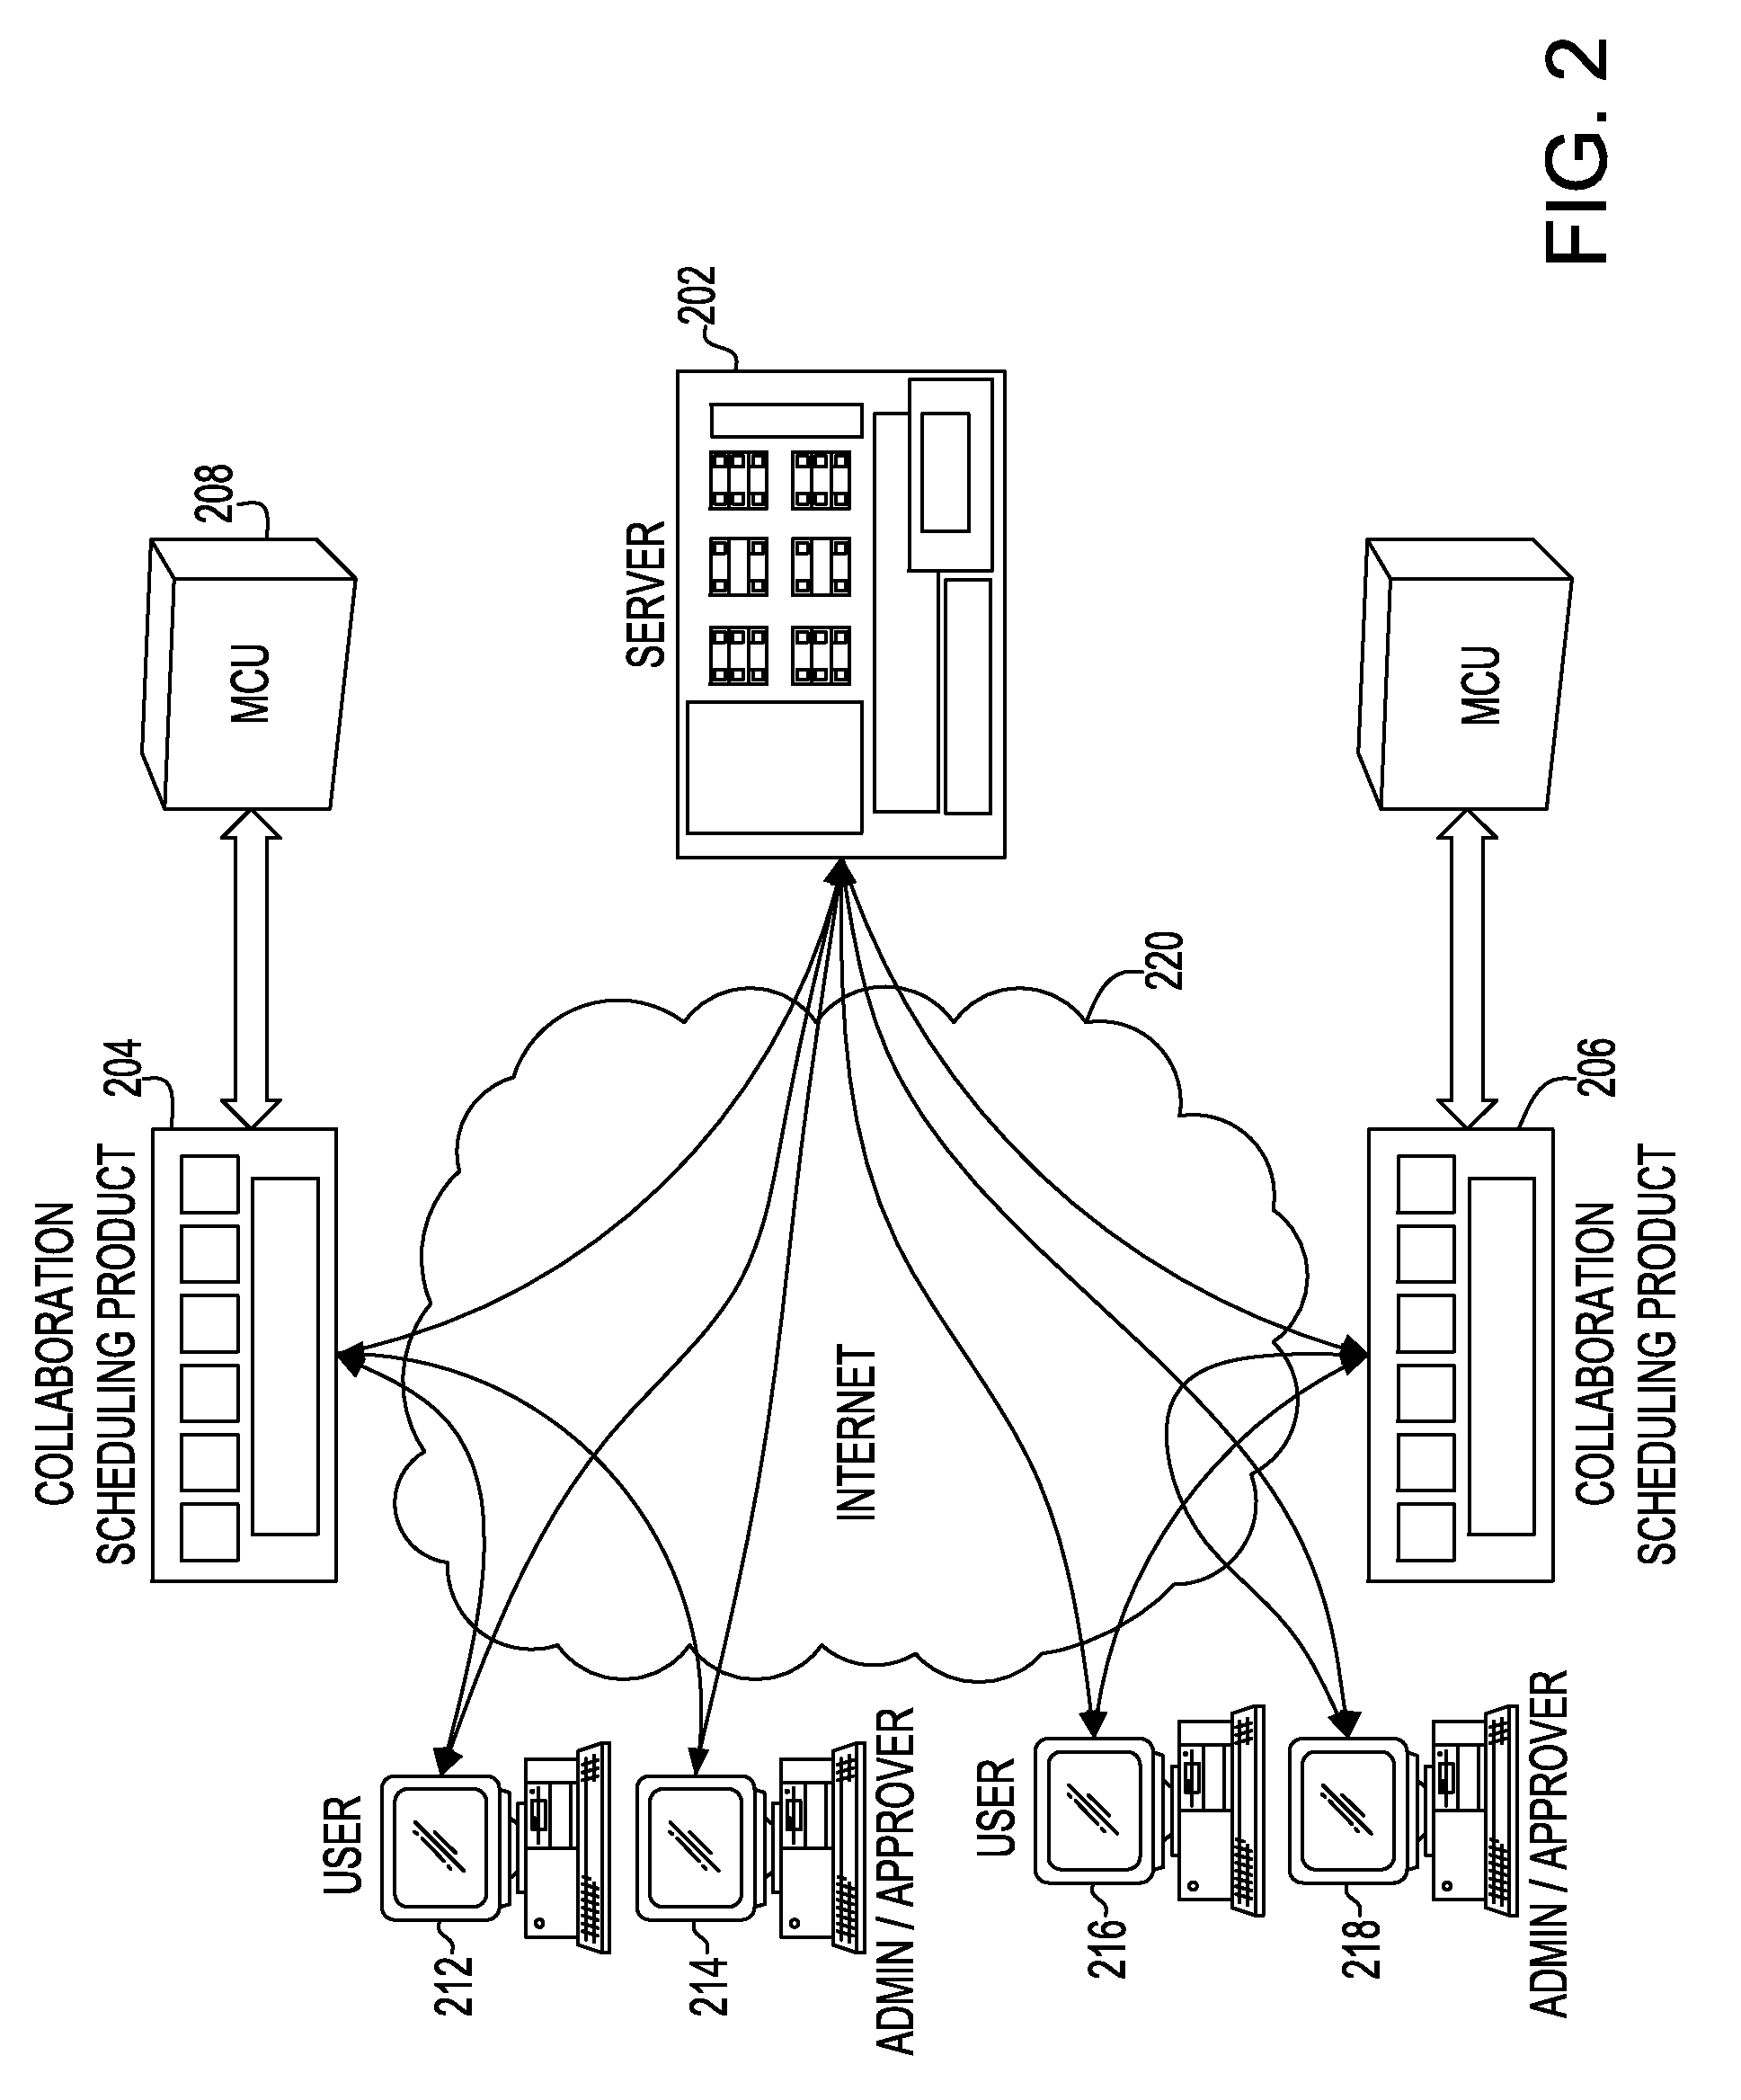 System and method for quantifying and using virtual travel mileage